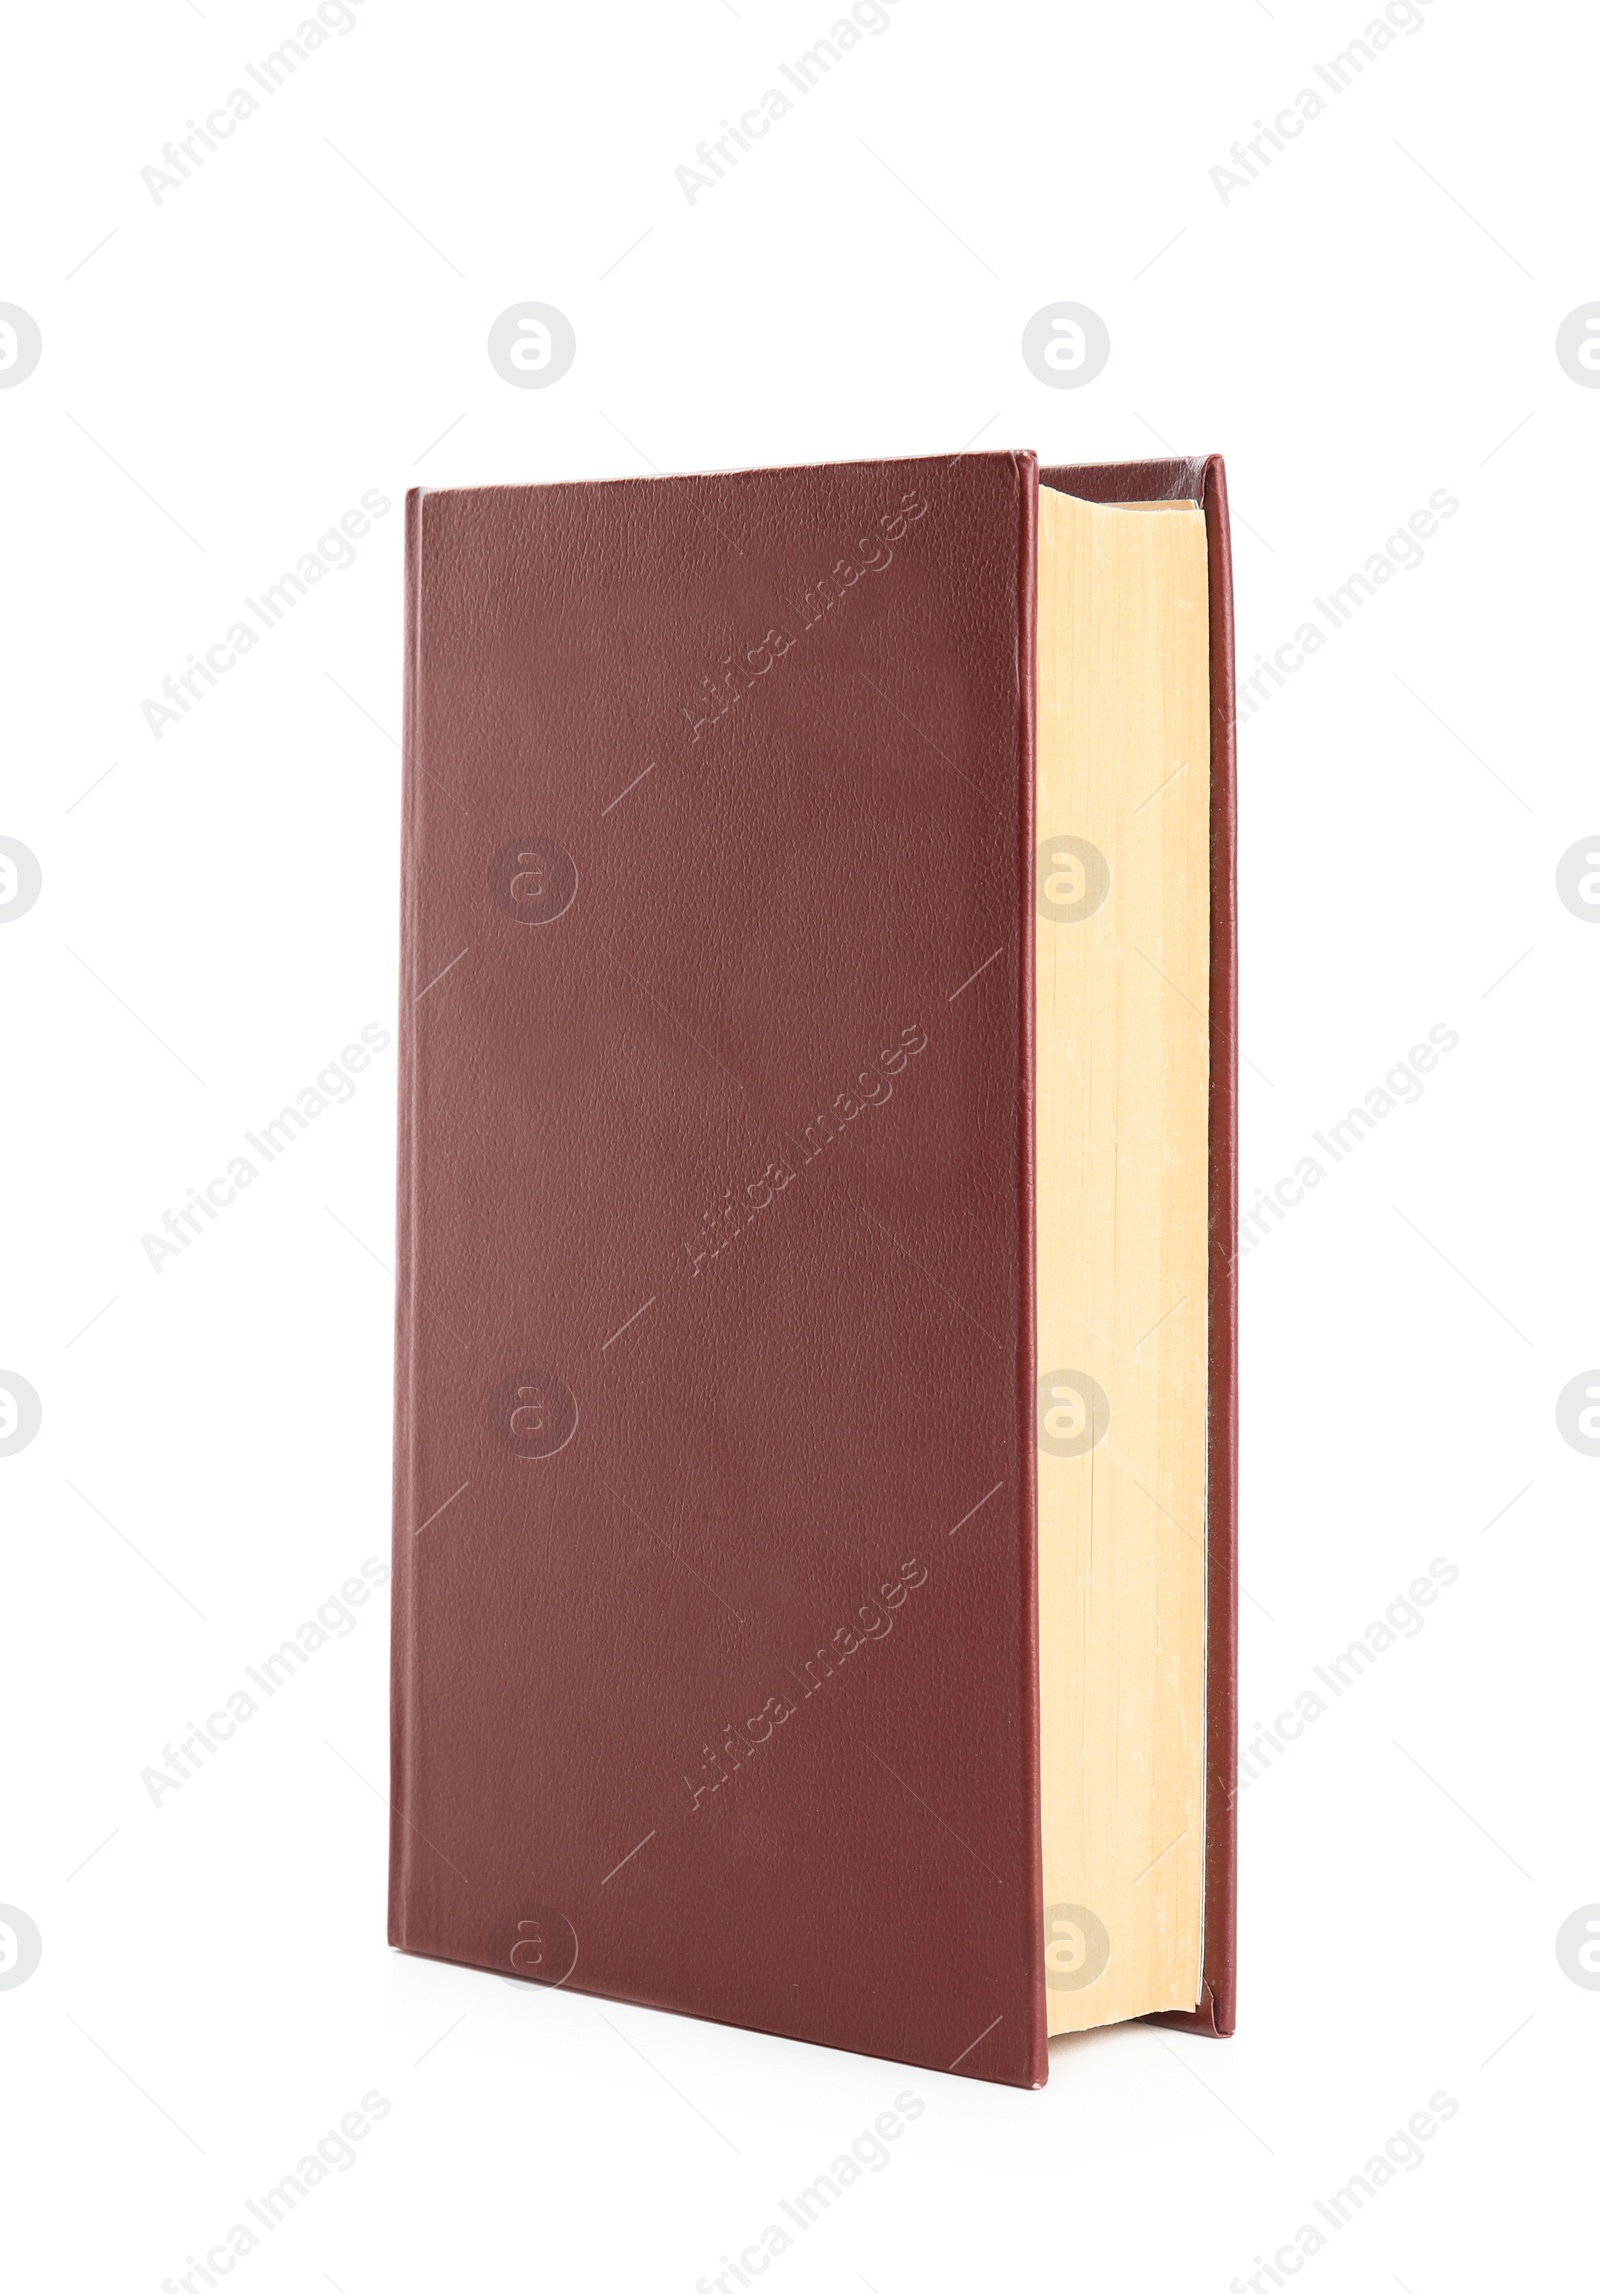 Photo of Closed color hardcover book isolated on white